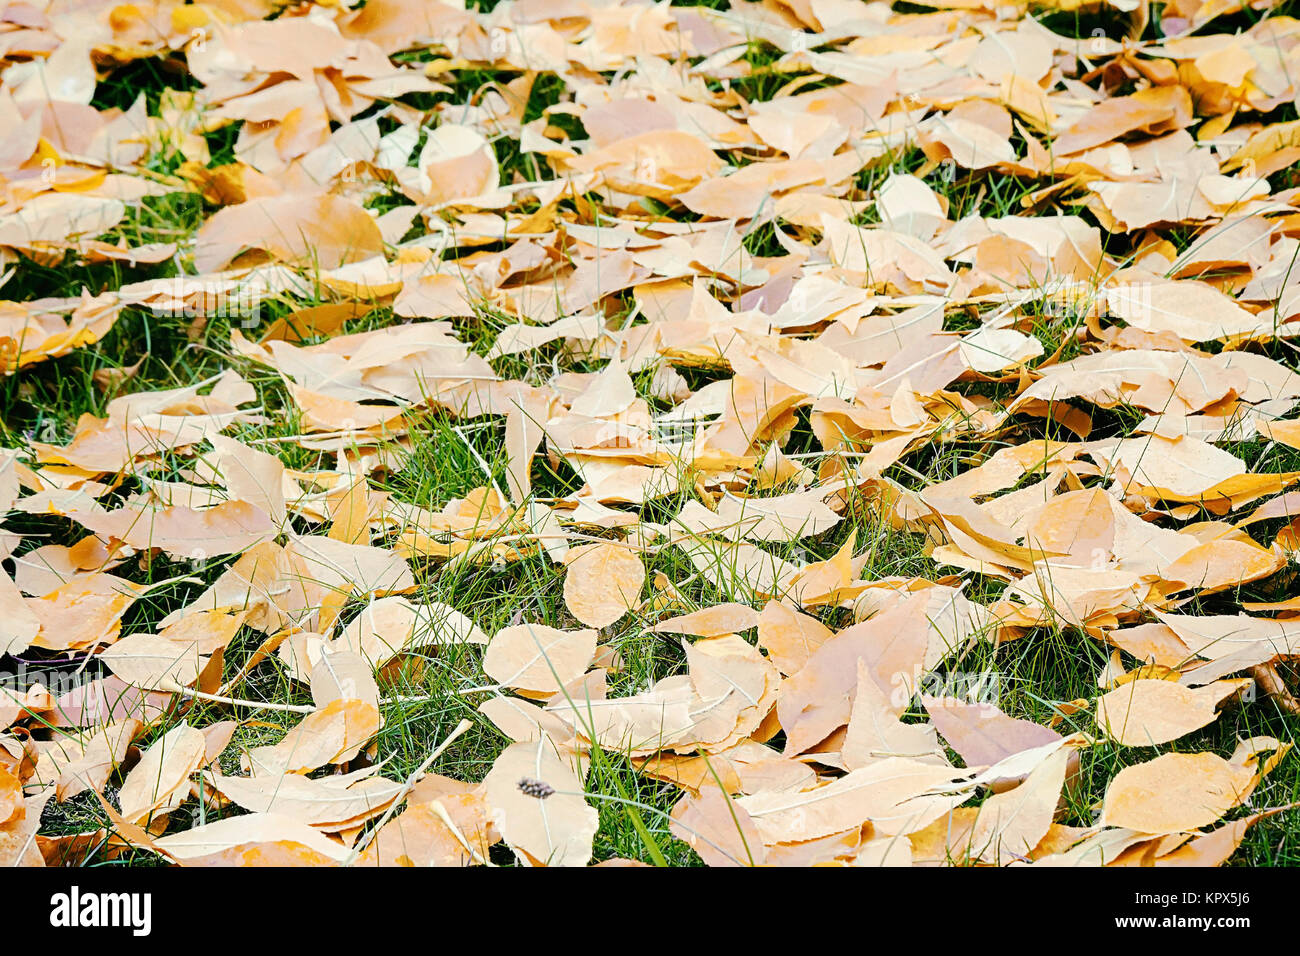 Fallen red leaves of aspen on a background of green moss on the ground. Stock Photo